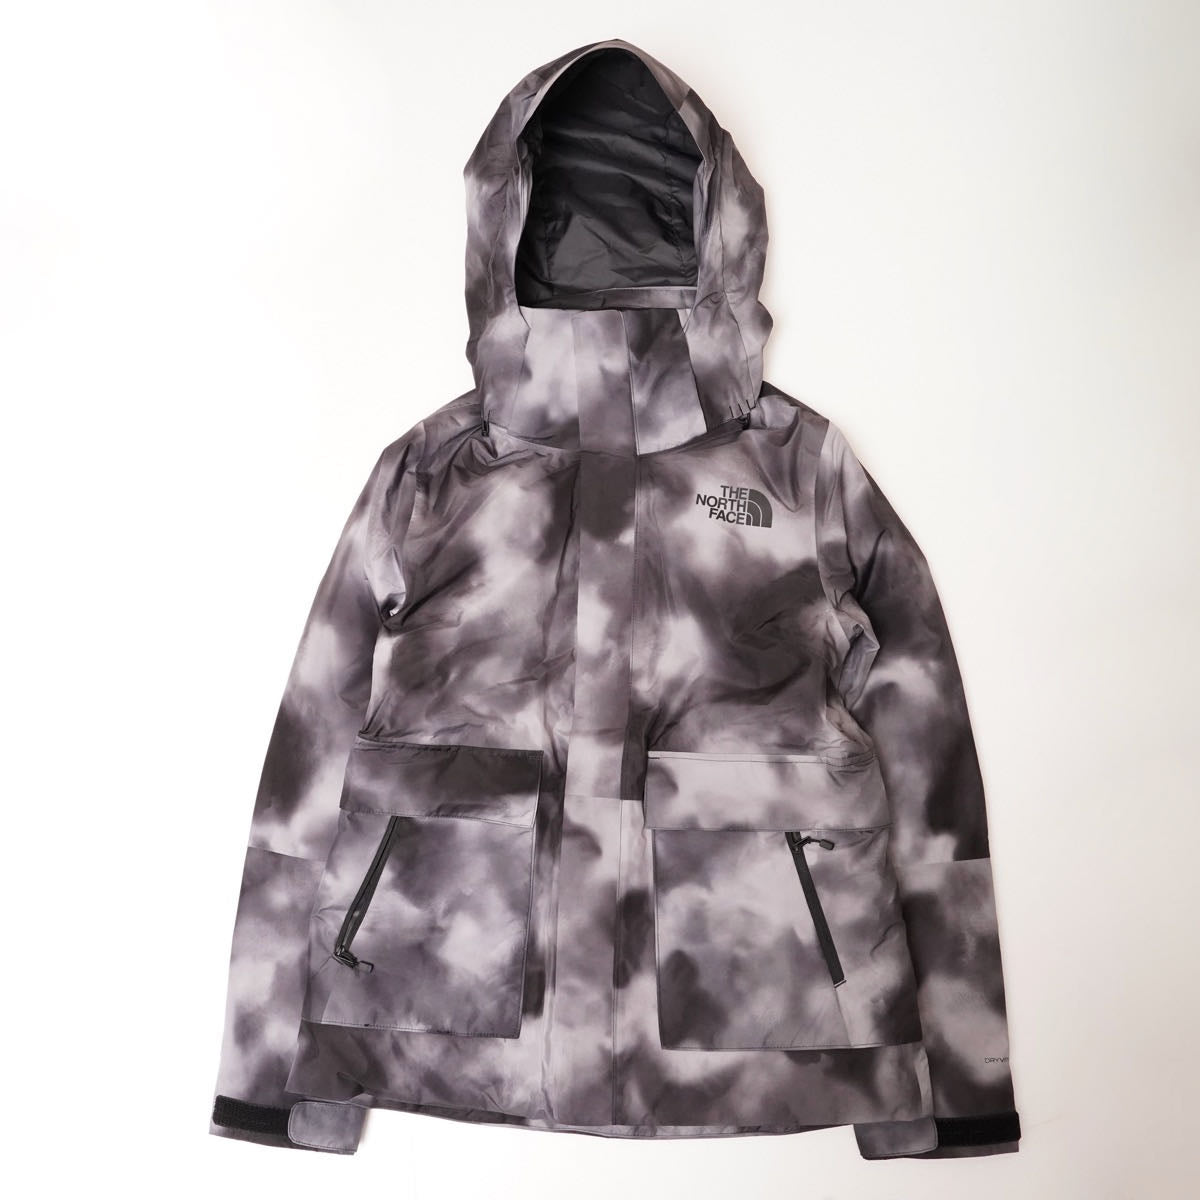 【WOMEN】The North Face DRYVENT Triclimate Jacket